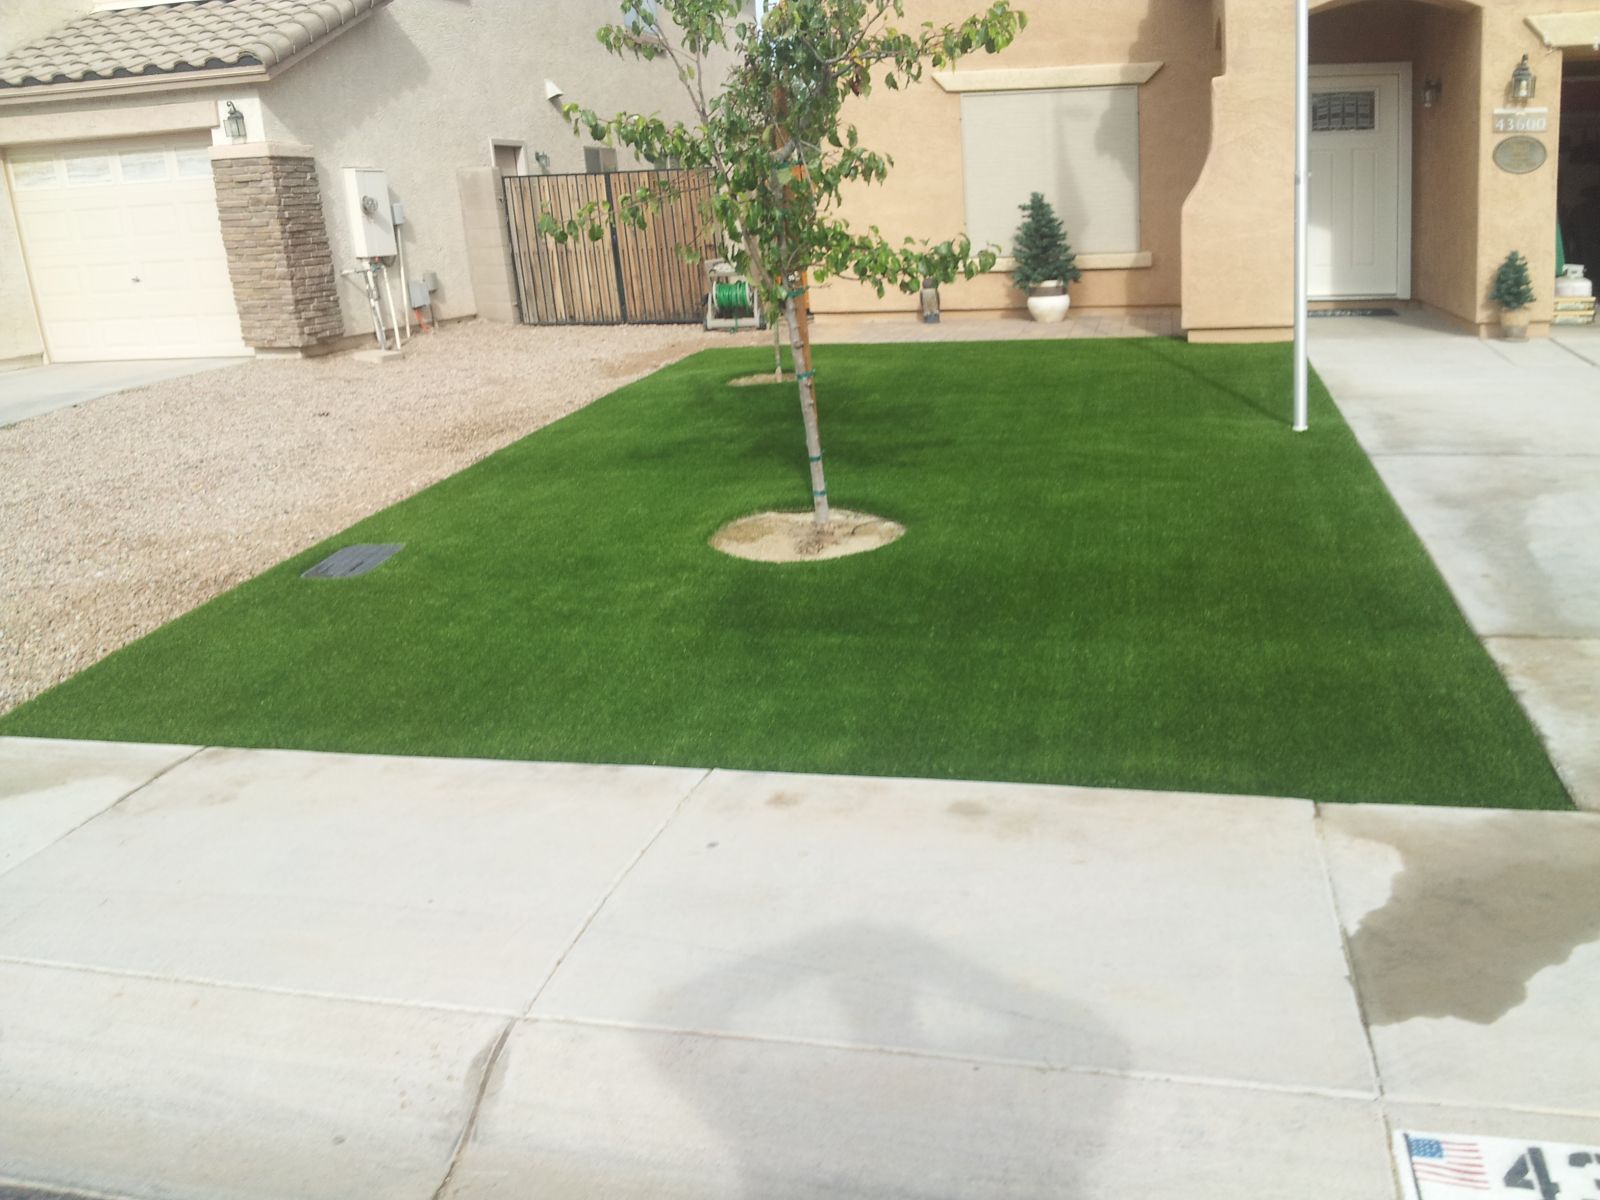 Consider Artificial Turf Putting Greens from Luxury Turf